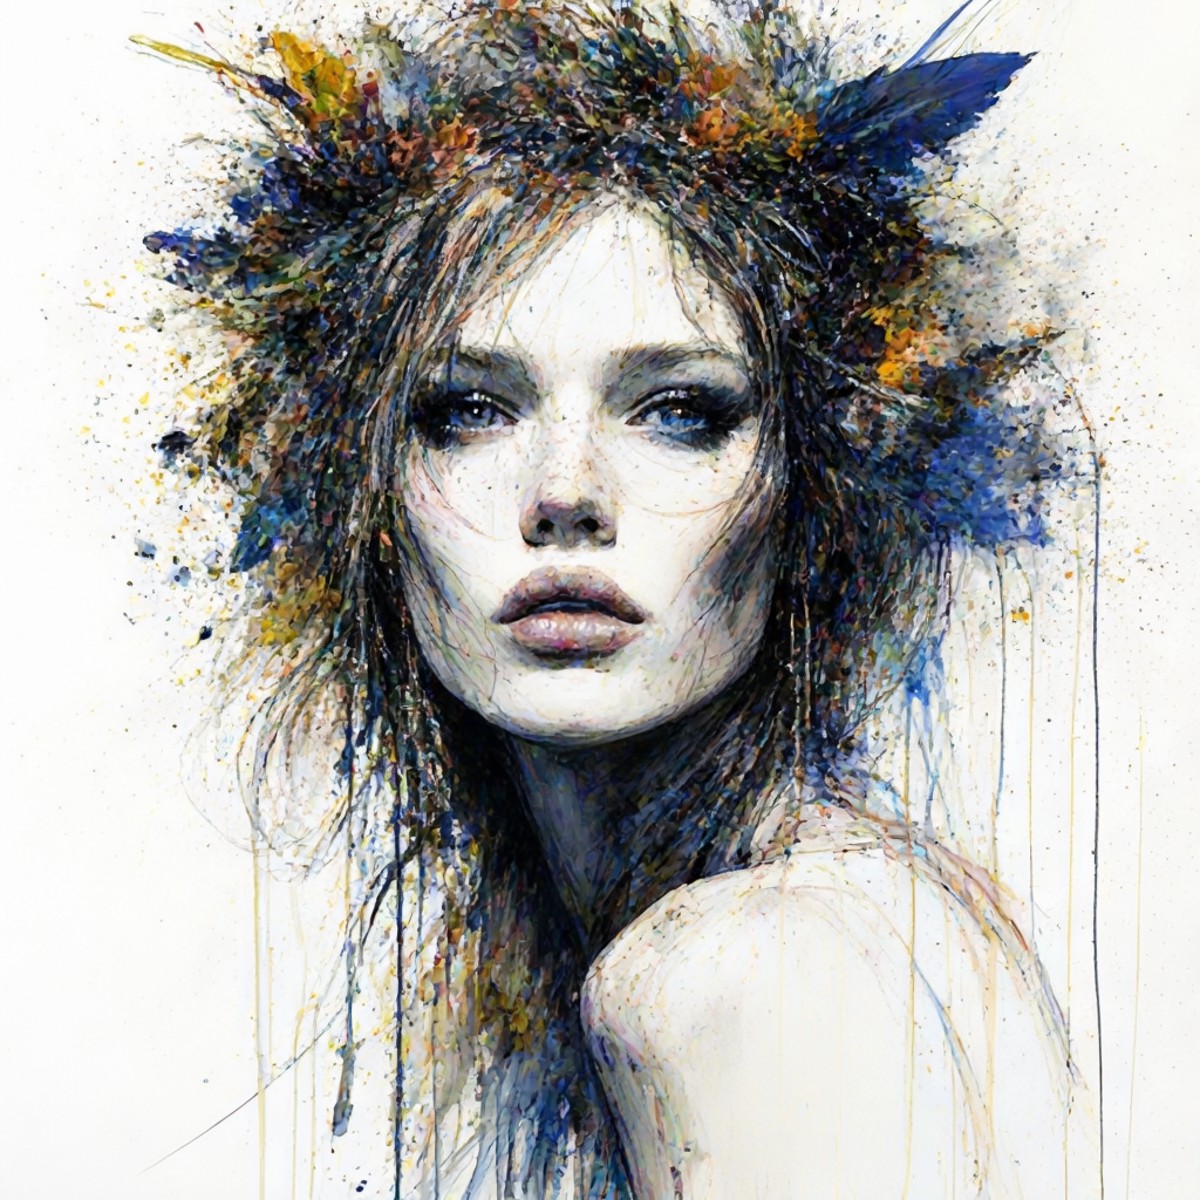 Sultry seductress at party, by Minjae Lee, Carne Griffiths, Emily Kell, Steve McCurry, Geoffroy Thoorens, Aaron Horkey, Jo...